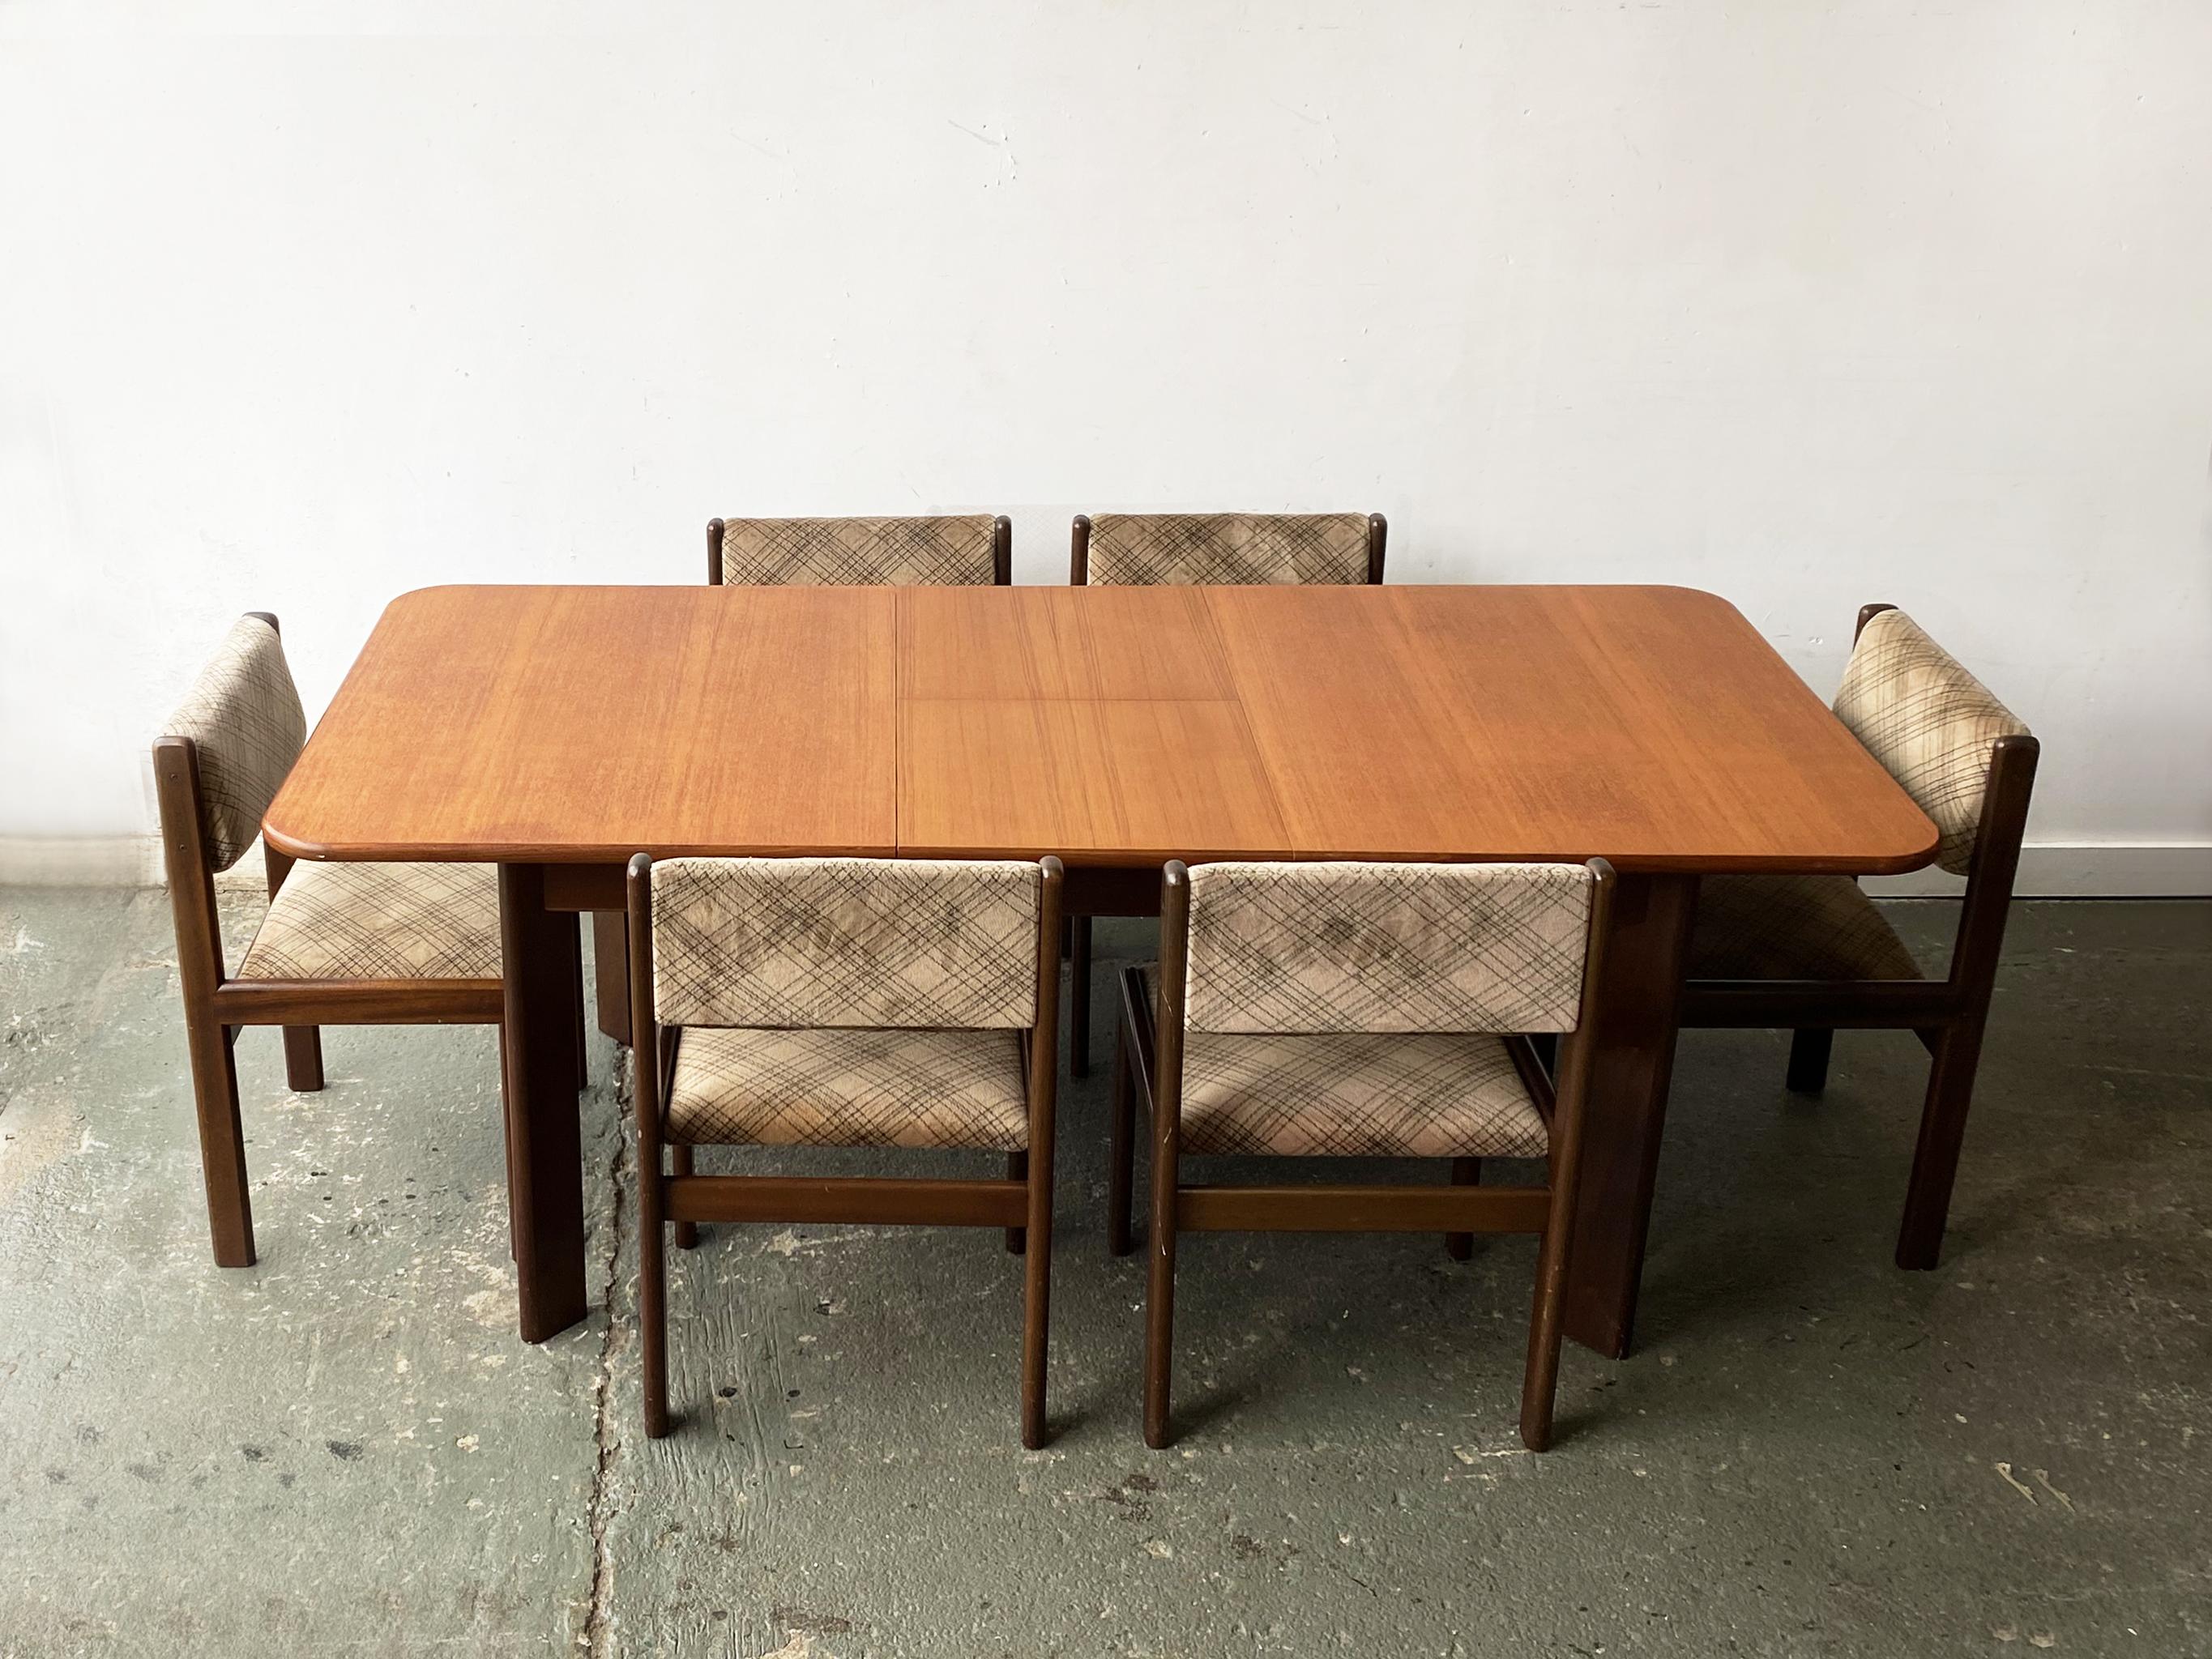 A G plan extending dining table, with the matching 6 dining chairs with the original upholstery.

The design s not typical G Plan. The table has wide angled legs and the chairs have a rounded corner dark wood frame.

G Plan collaborated with Danish